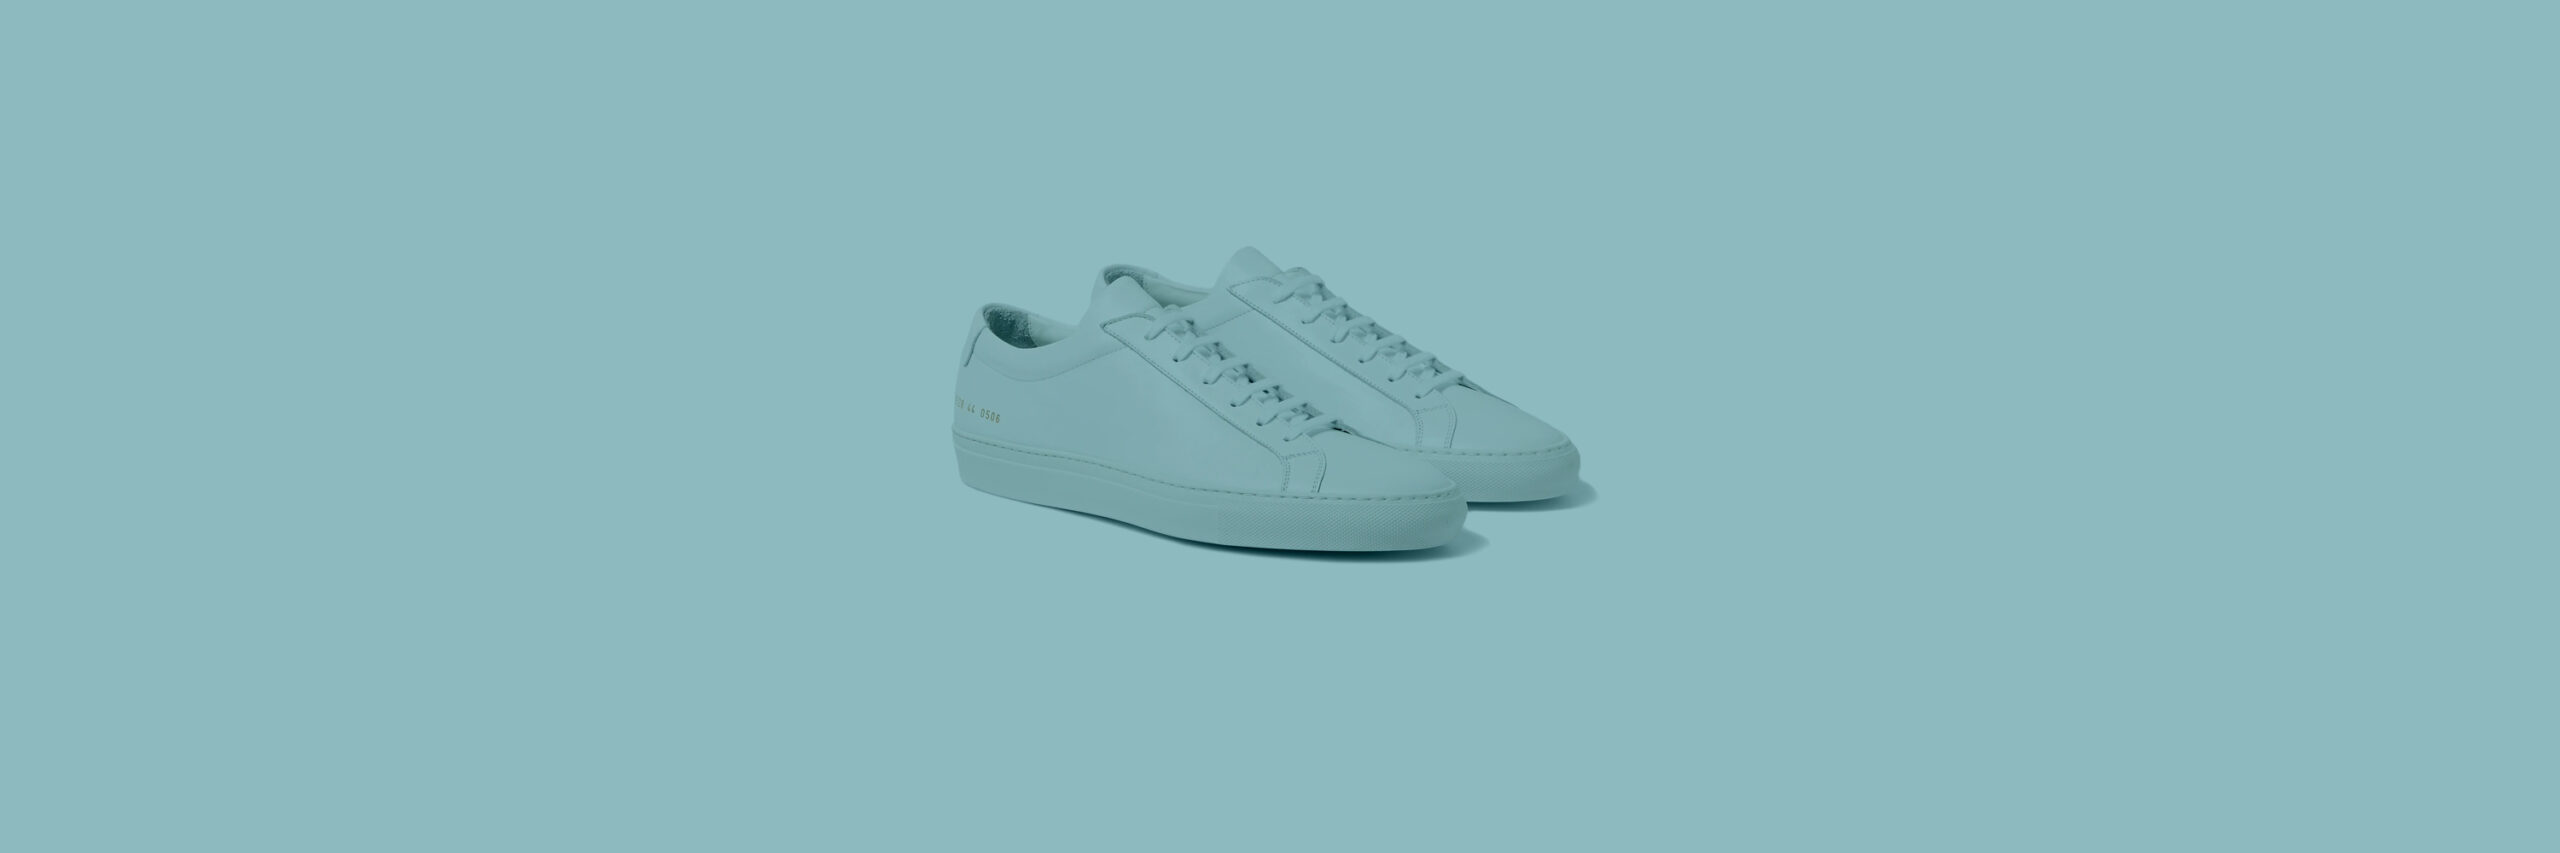 feature-mininmal-white-sneakers-scaled